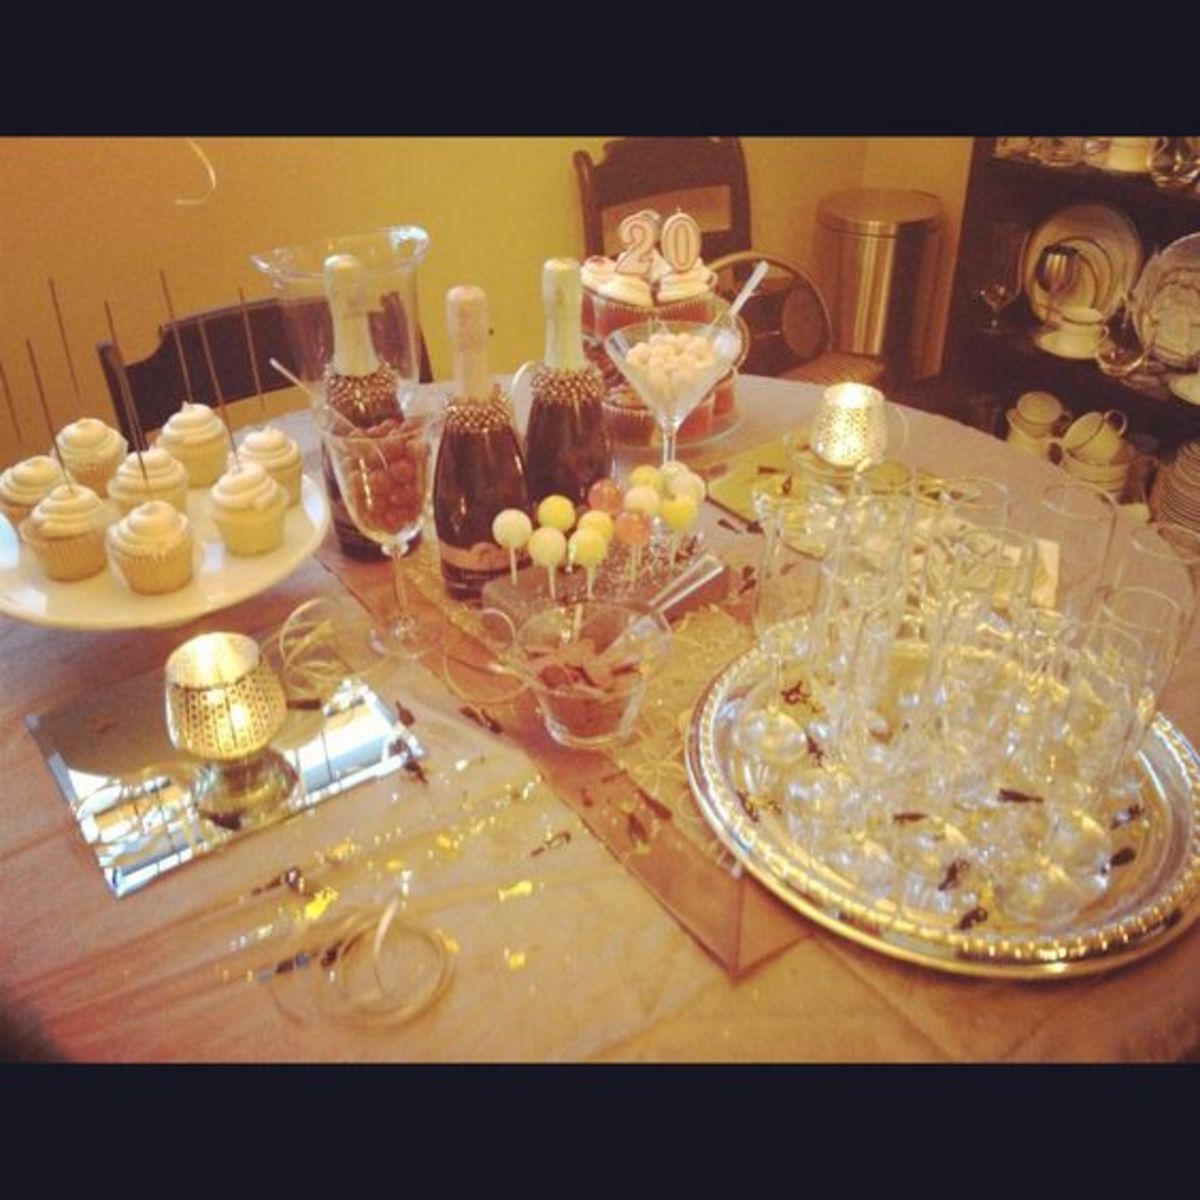 Dollar store- table cloth (curtain) runner, platters,champagne flutes, sparklers,lollipops,mirrors,candle holders bracelettes on the bubbly,napkins, curling ribbon and bottle and bubble confetti